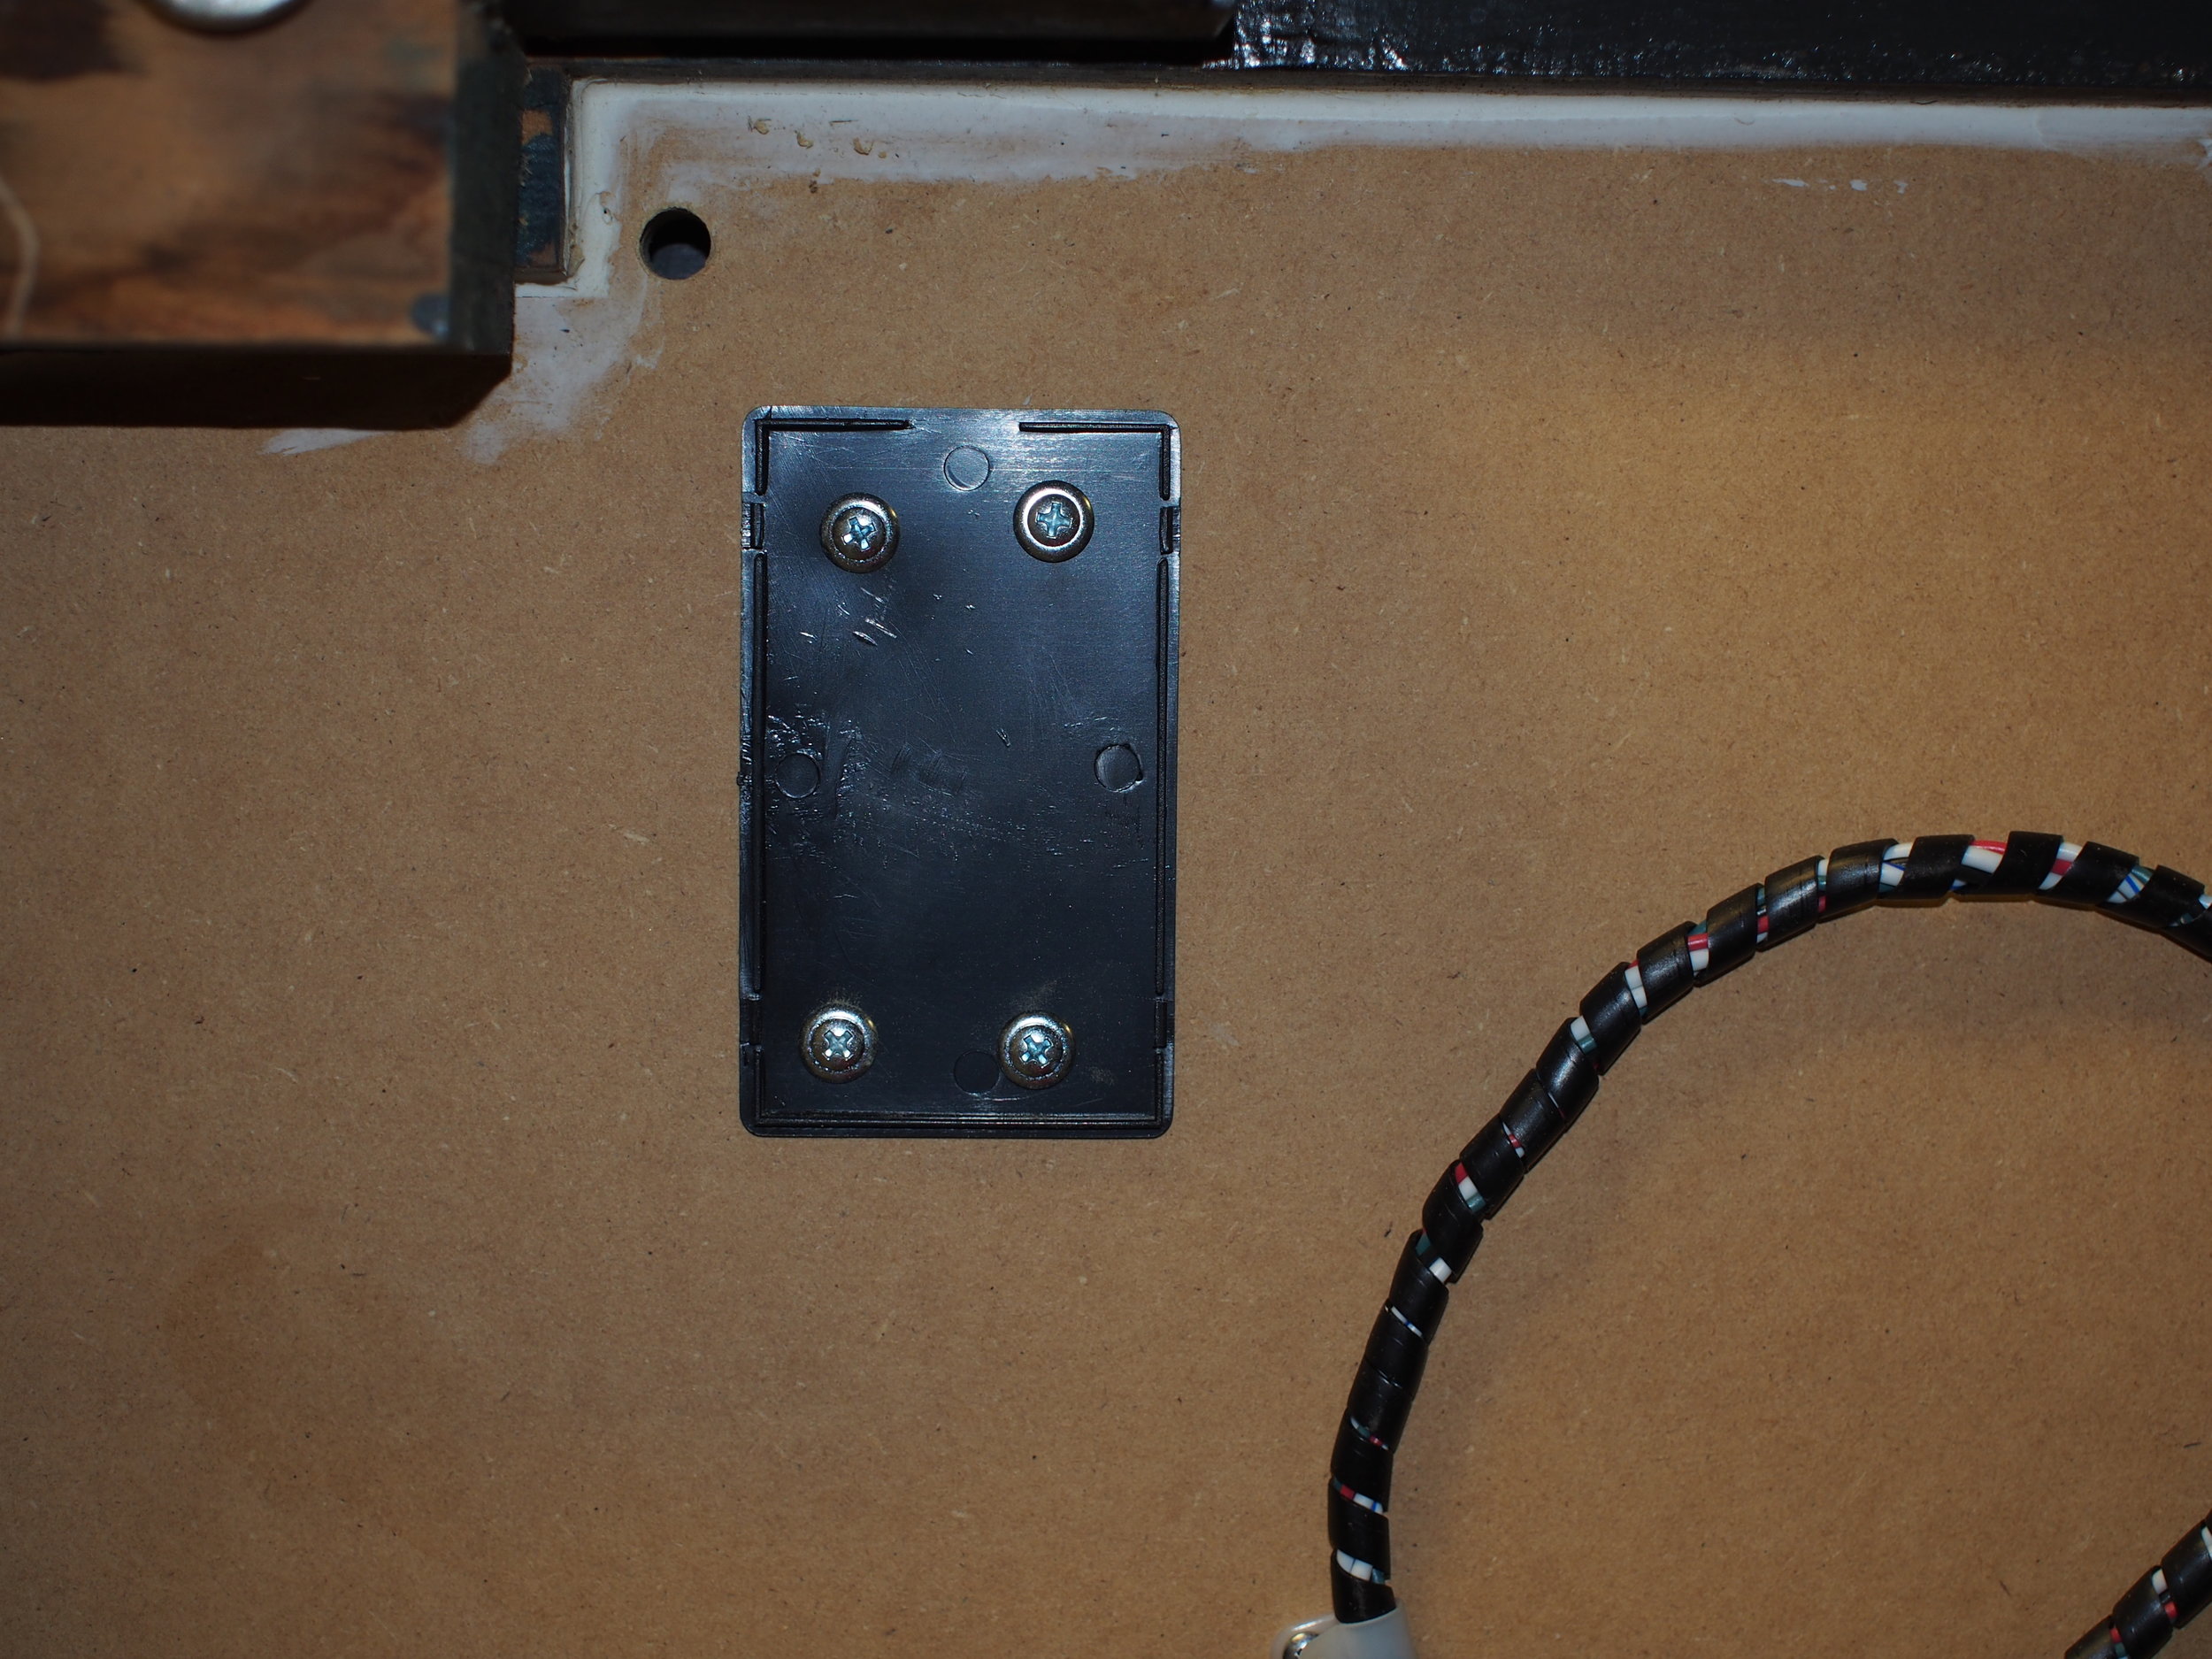 The case lid, along with the hole for the dial wires and the LED power leads